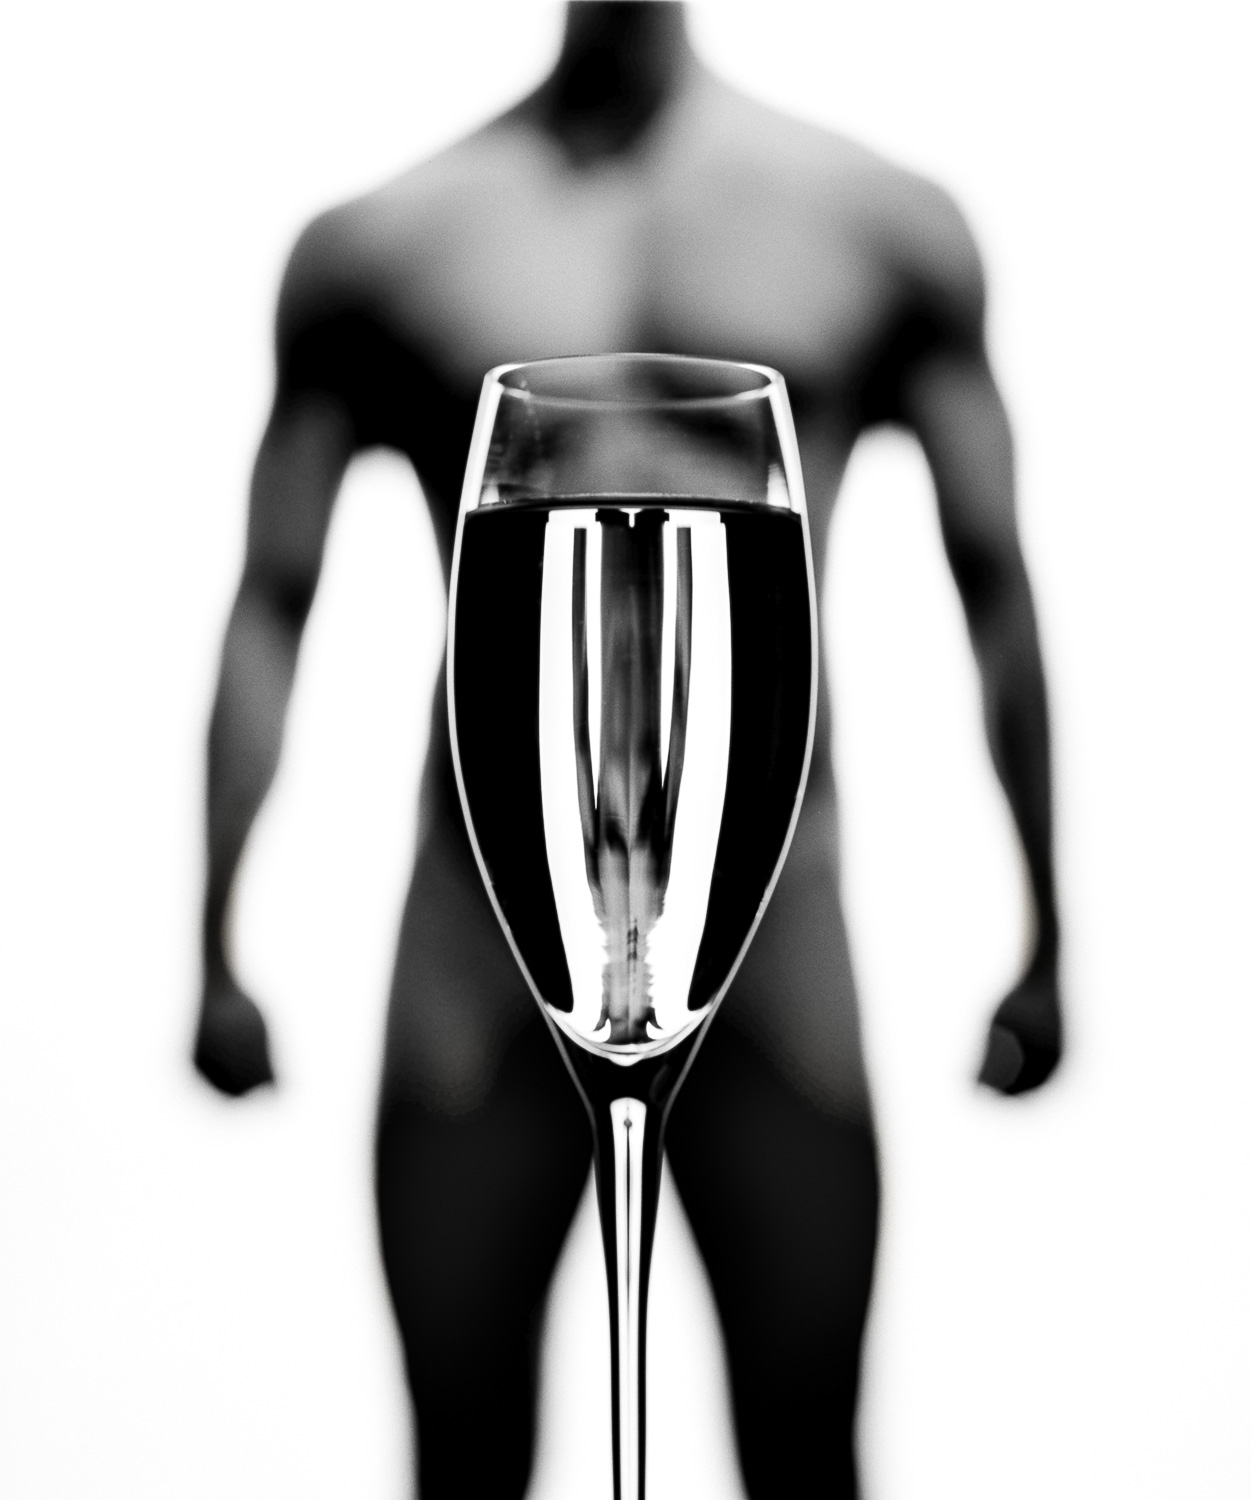 Black and white nudes, fine art photography, nude art prints, bw fine art, refraction, reflection, in glass, male